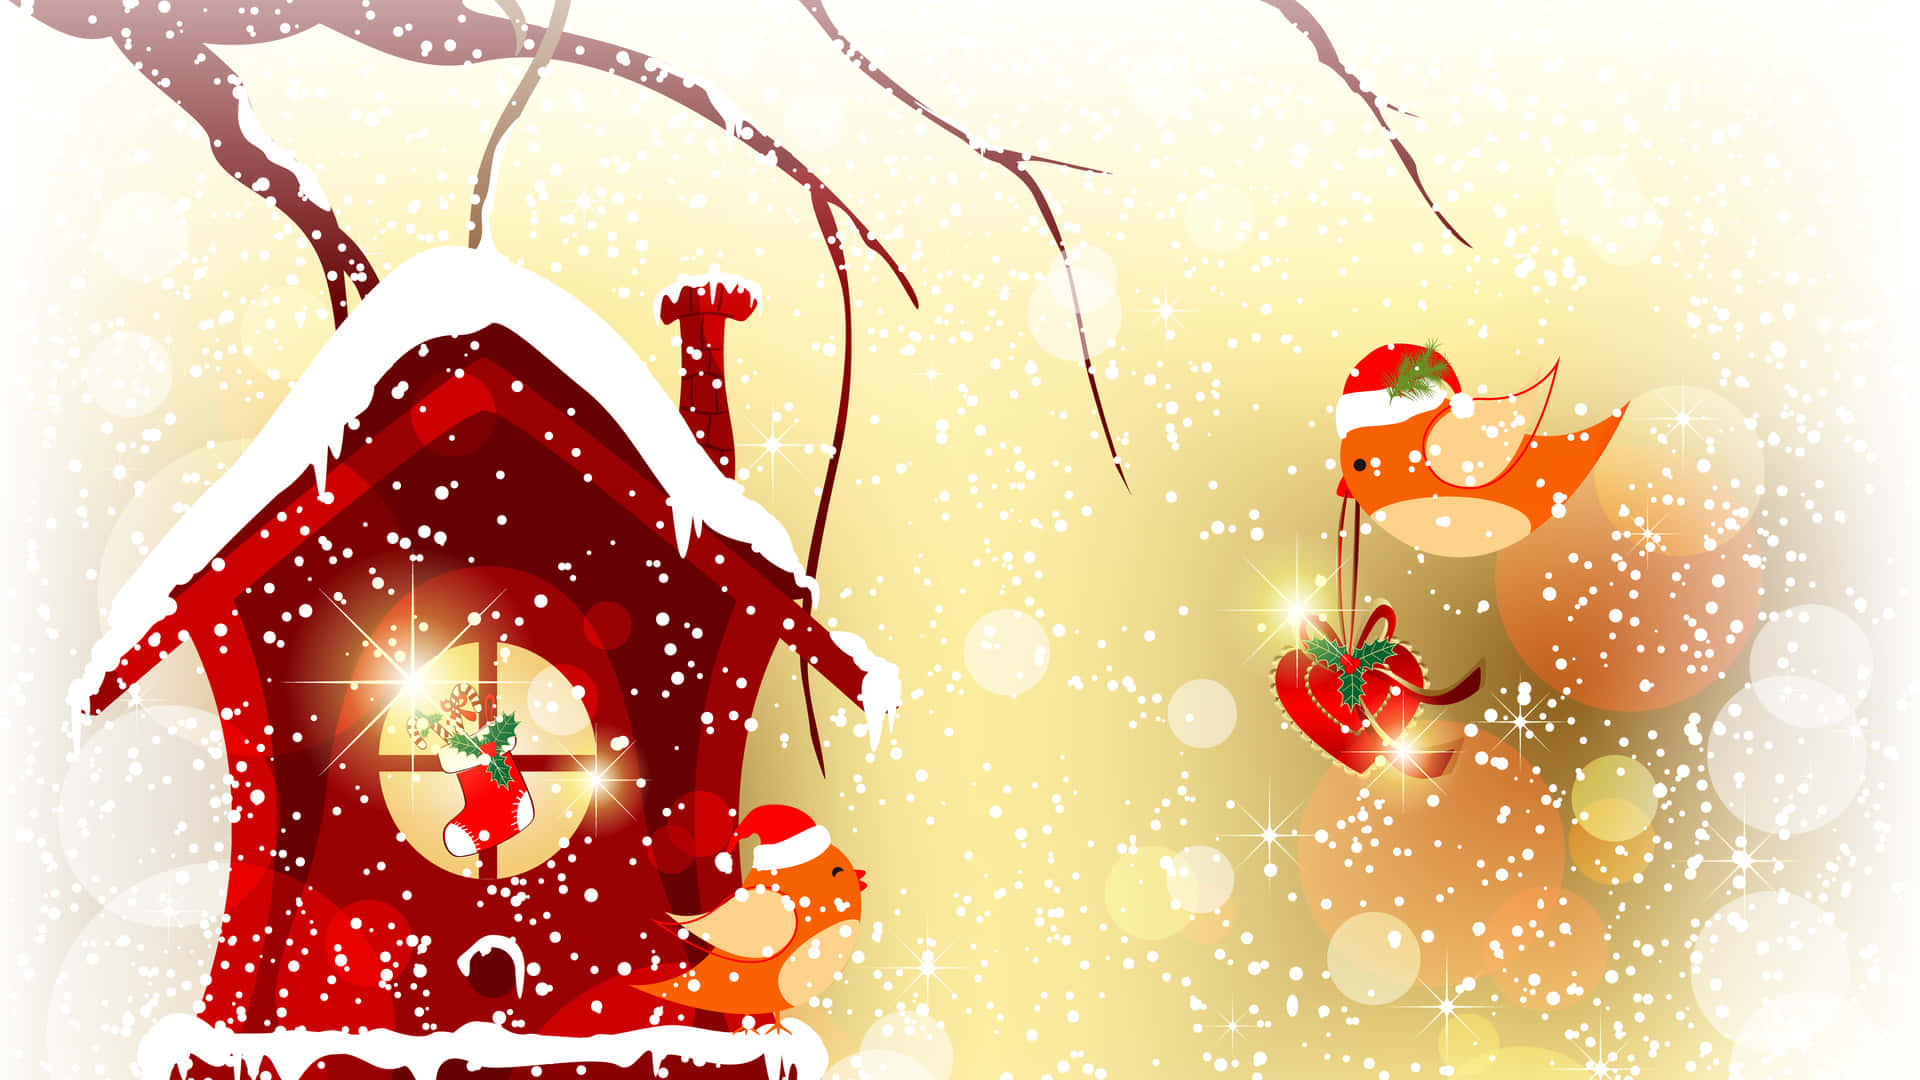 Get in the Holiday spirit with this cute Christmas background!